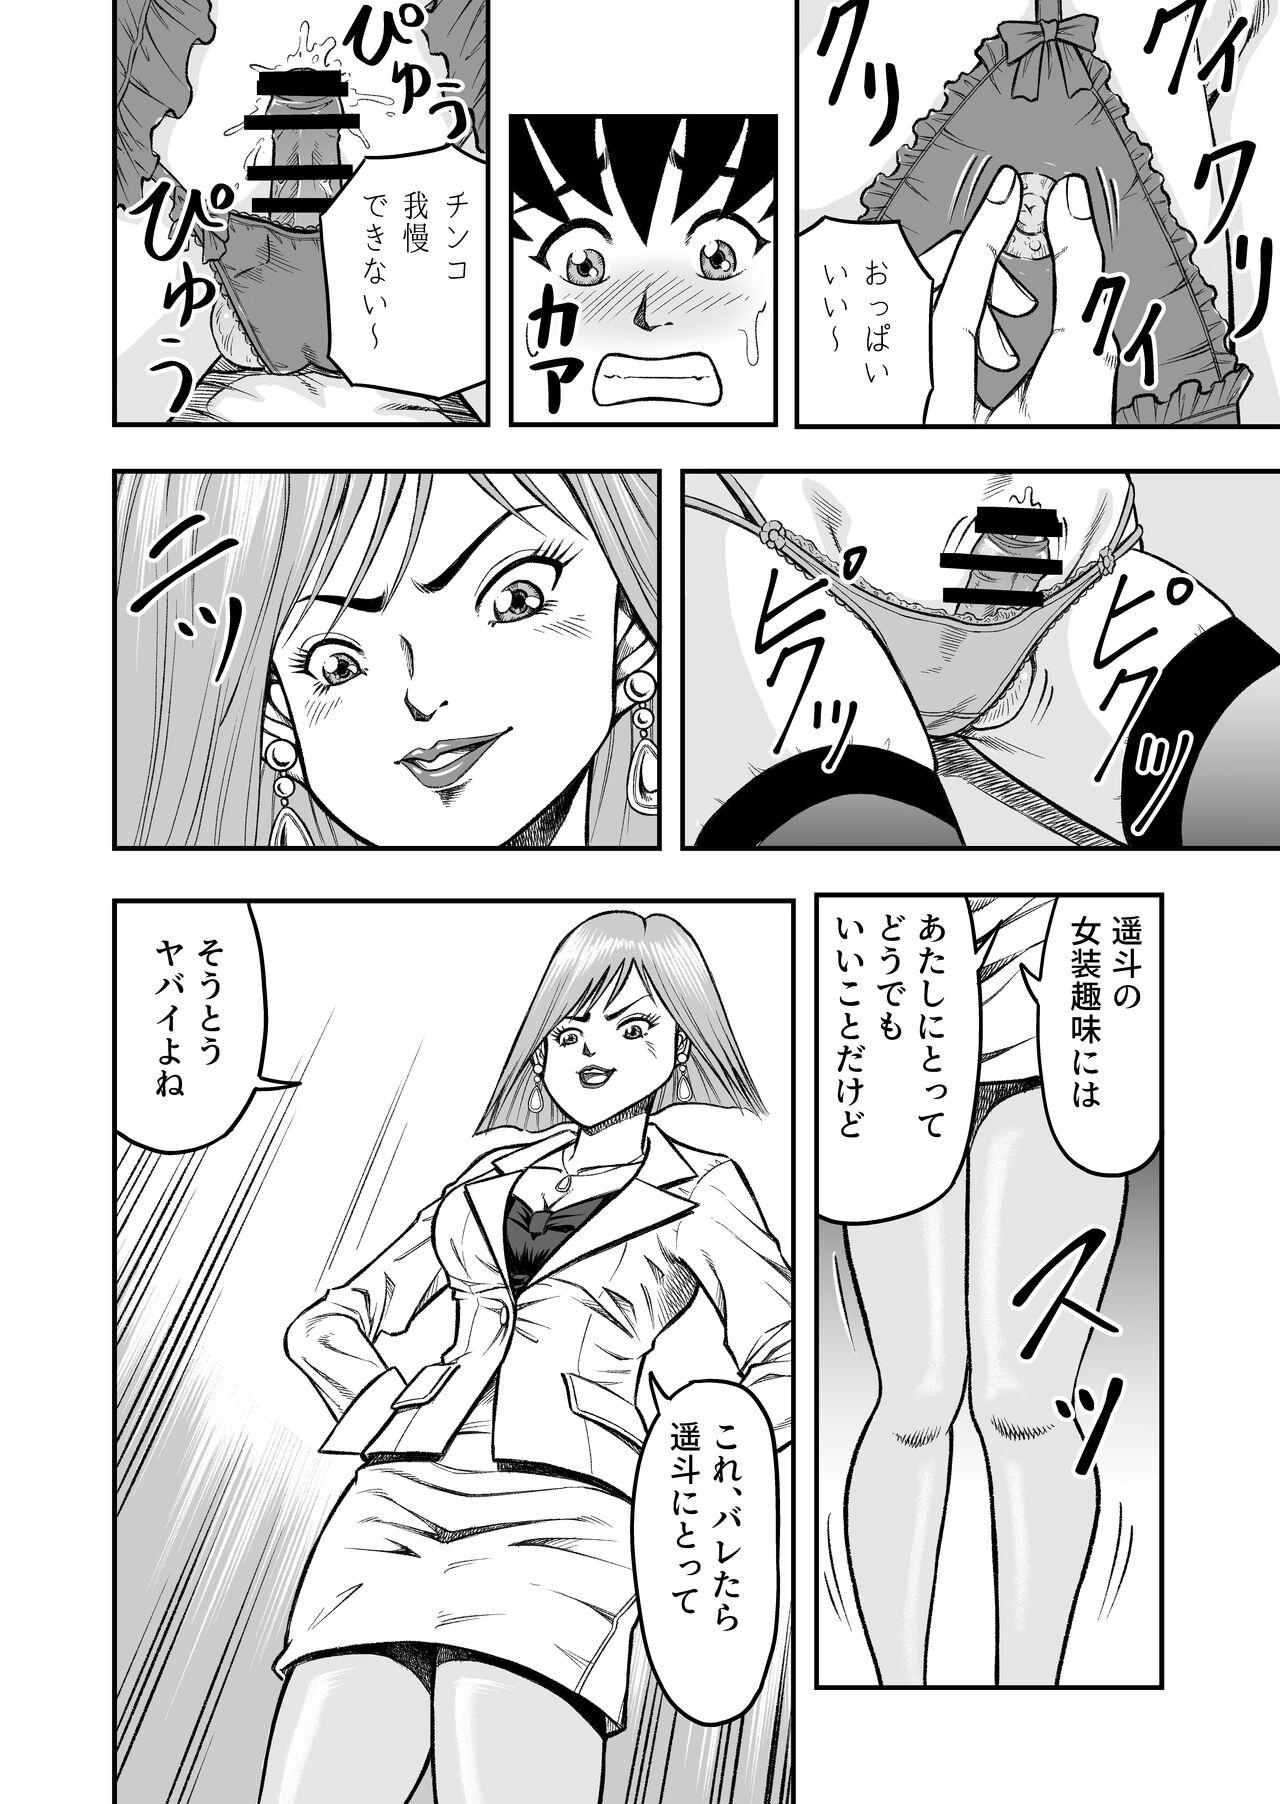 Lingerie OwnWillボクがアタシになったとき 総集編 - Original Stepfamily - Page 10